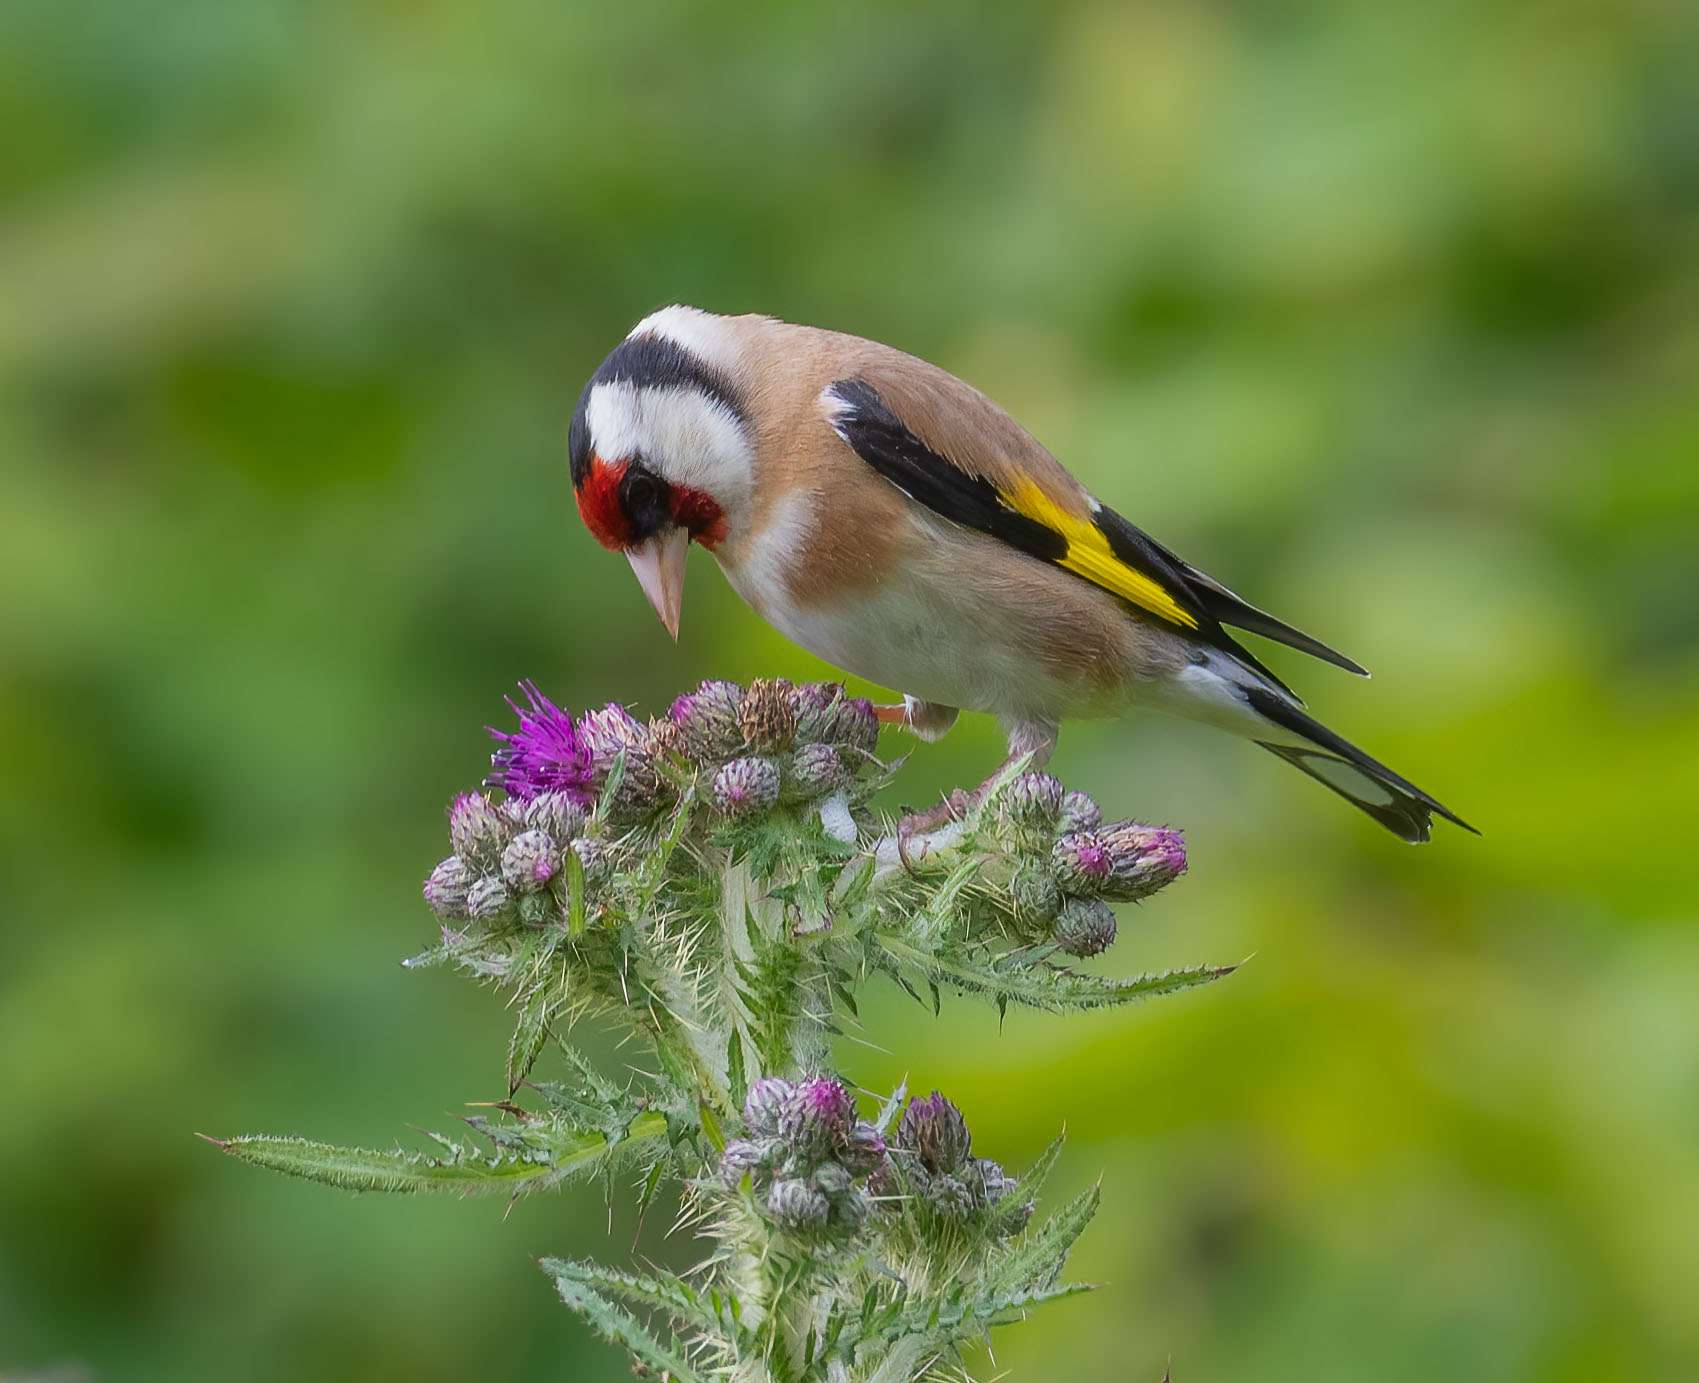 Goldfinch by Mark Sturman at Parke N.T.